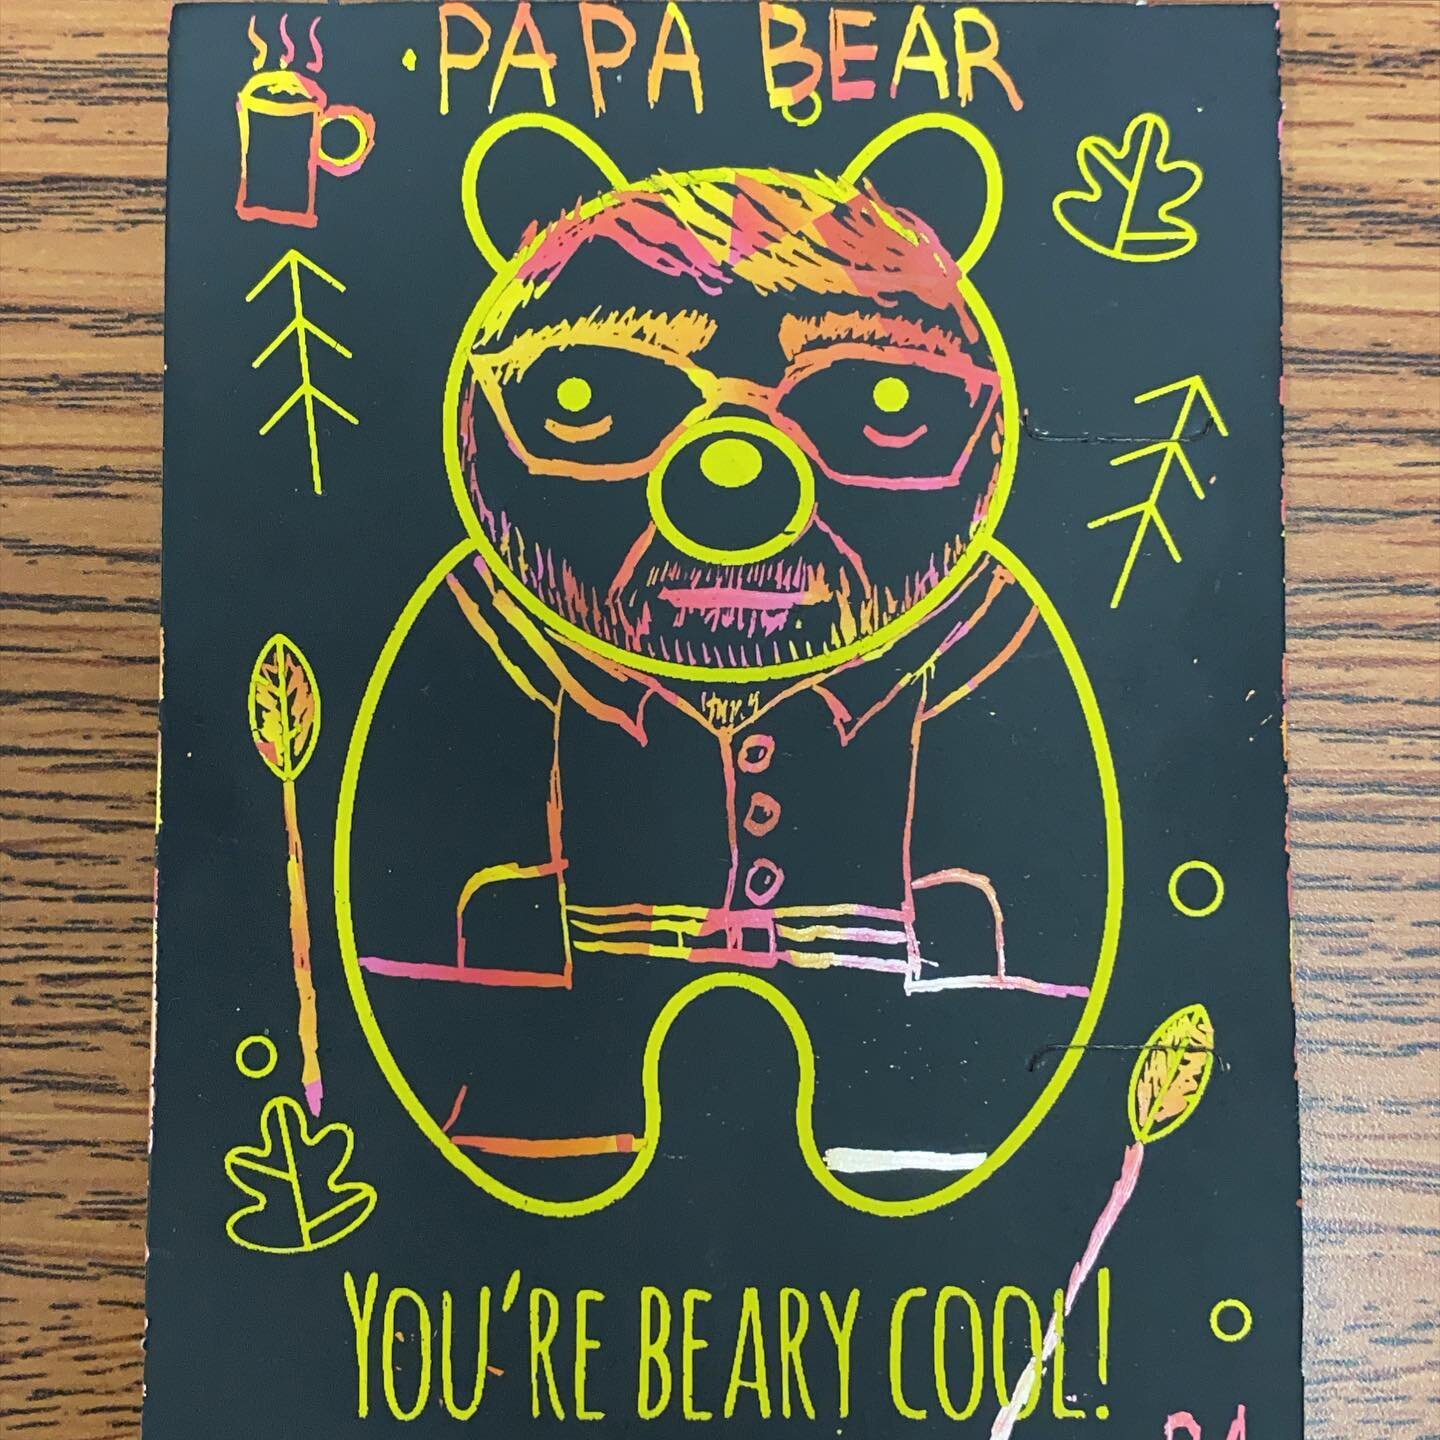 Sometimes it&rsquo;s the little things that make you happy. Received this from a student and it made my day! I think this is supposed to be me? #students #sfasu #nacogdoches